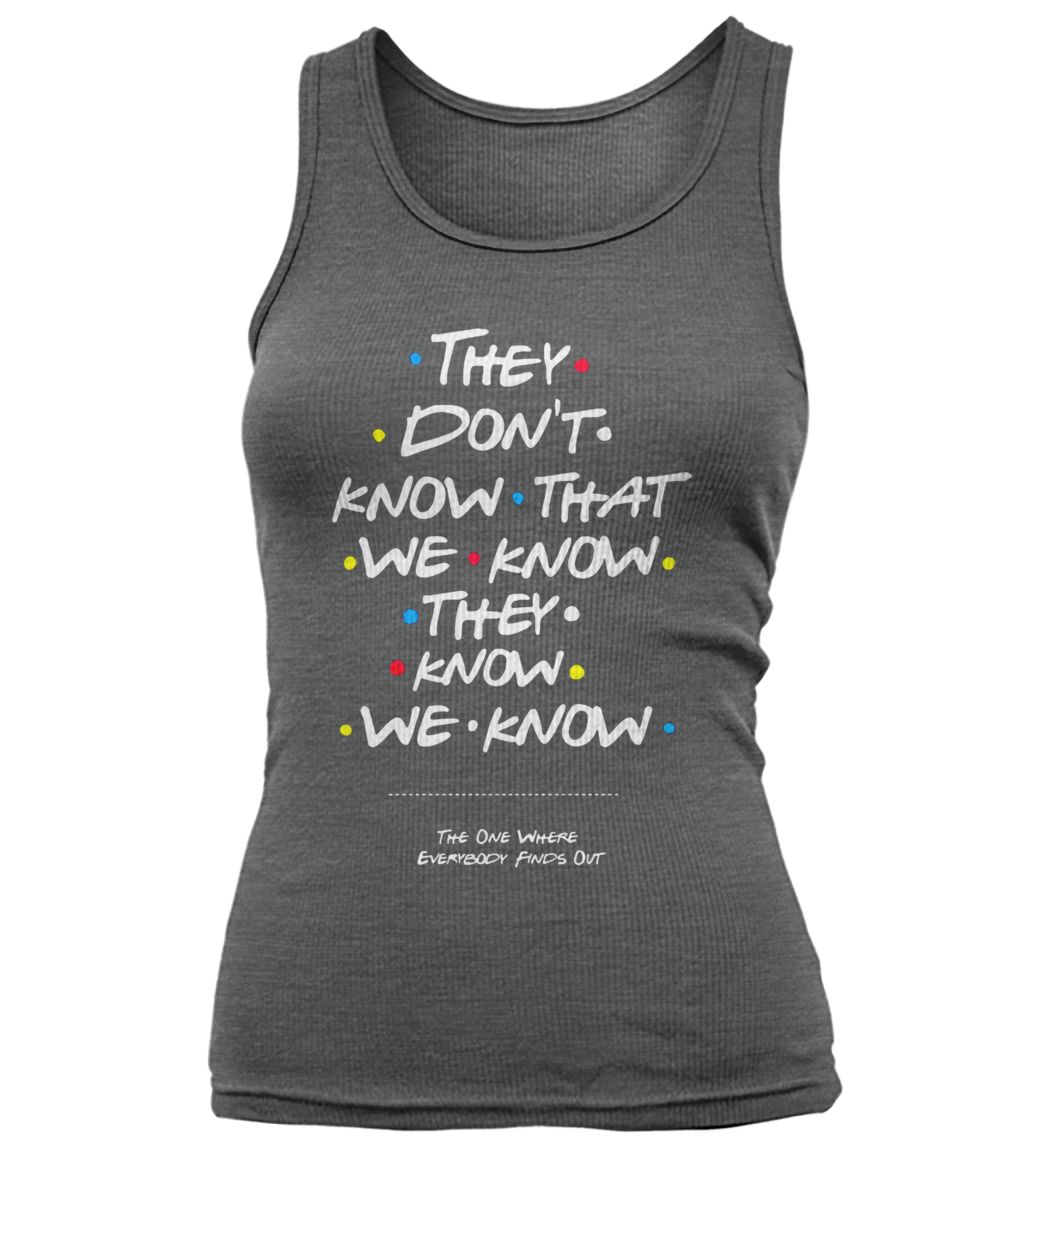 Friends tv show they don't know that we know they know we know women's tank top